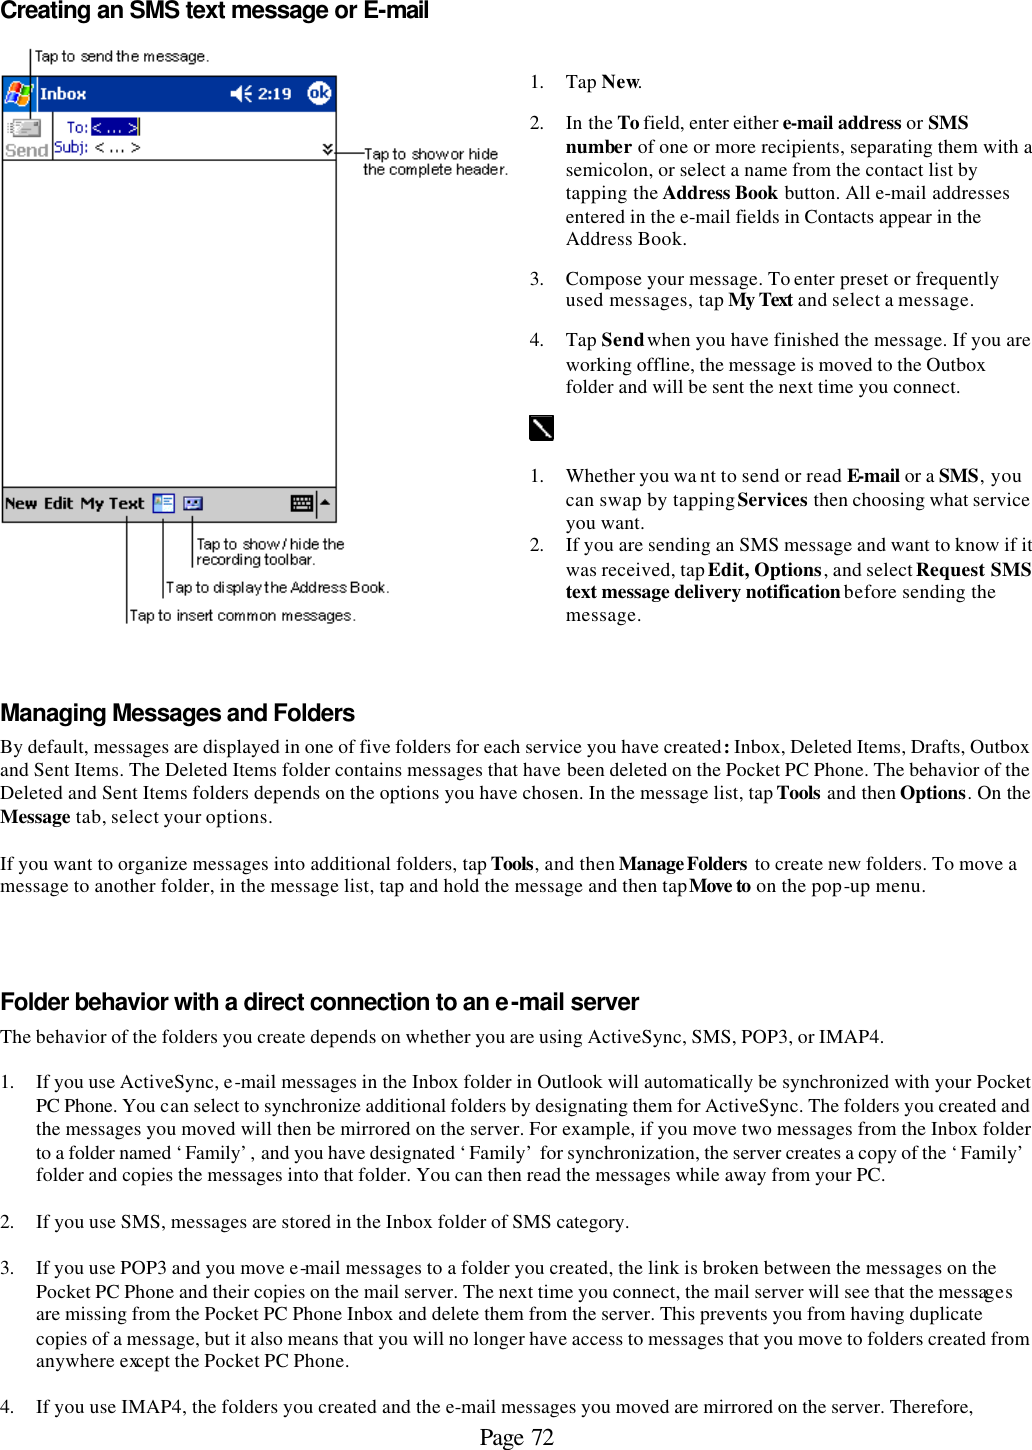 Page 72 Creating an SMS text message or E-mail   1. Tap New.  2. In the To field, enter either e-mail address or SMS number of one or more recipients, separating them with a semicolon, or select a name from the contact list by tapping the Address Book button. All e-mail addresses entered in the e-mail fields in Contacts appear in the Address Book. 3. Compose your message. To enter preset or frequently used messages, tap My Text and select a message. 4. Tap Send when you have finished the message. If you are working offline, the message is moved to the Outbox folder and will be sent the next time you connect.   1. Whether you wa nt to send or read E-mail or a SMS, you can swap by tapping Services then choosing what service you want. 2. If you are sending an SMS message and want to know if it was received, tap Edit, Options, and select Request SMS text message delivery notification before sending the message.  Managing Messages and Folders By default, messages are displayed in one of five folders for each service you have created: Inbox, Deleted Items, Drafts, Outbox and Sent Items. The Deleted Items folder contains messages that have been deleted on the Pocket PC Phone. The behavior of the Deleted and Sent Items folders depends on the options you have chosen. In the message list, tap Tools and then Options. On the Message tab, select your options.  If you want to organize messages into additional folders, tap Tools, and then Manage Folders  to create new folders. To move a message to another folder, in the message list, tap and hold the message and then tap Move to on the pop-up menu.    Folder behavior with a direct connection to an e-mail server The behavior of the folders you create depends on whether you are using ActiveSync, SMS, POP3, or IMAP4.   1. If you use ActiveSync, e-mail messages in the Inbox folder in Outlook will automatically be synchronized with your Pocket PC Phone. You can select to synchronize additional folders by designating them for ActiveSync. The folders you created and the messages you moved will then be mirrored on the server. For example, if you move two messages from the Inbox folder to a folder named ‘Family’, and you have designated ‘Family’ for synchronization, the server creates a copy of the ‘Family’ folder and copies the messages into that folder. You can then read the messages while away from your PC.  2. If you use SMS, messages are stored in the Inbox folder of SMS category.  3. If you use POP3 and you move e-mail messages to a folder you created, the link is broken between the messages on the Pocket PC Phone and their copies on the mail server. The next time you connect, the mail server will see that the messages are missing from the Pocket PC Phone Inbox and delete them from the server. This prevents you from having duplicate copies of a message, but it also means that you will no longer have access to messages that you move to folders created from anywhere except the Pocket PC Phone.  4. If you use IMAP4, the folders you created and the e-mail messages you moved are mirrored on the server. Therefore, 